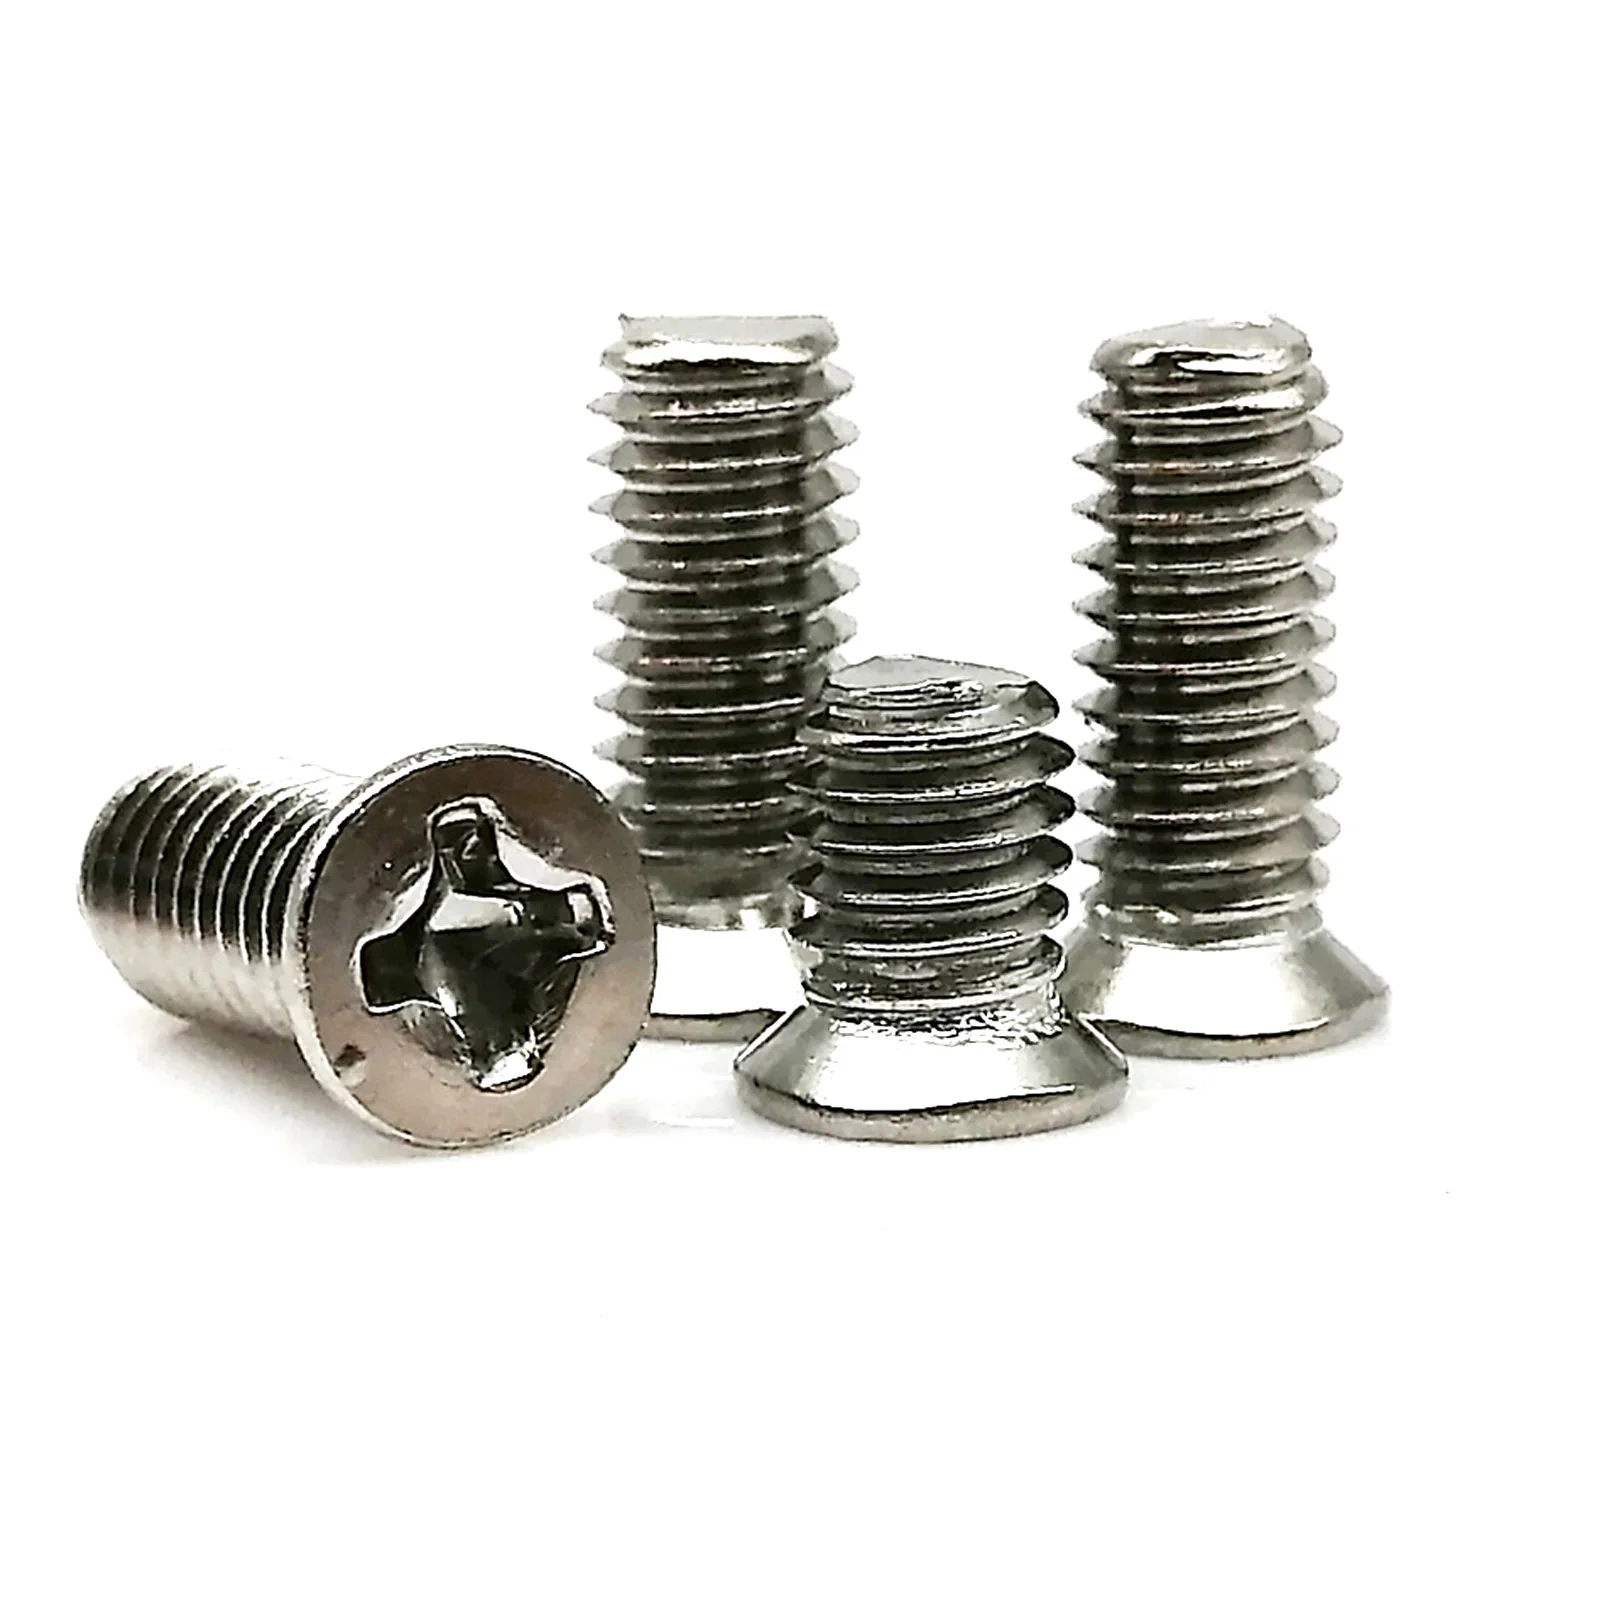 

50pcs M1.6 M2 M2.5 M3 M4 304 A2-70 Stainless Steel Nonstandard Cross Recessed Phillips Flat Countersunk Small Head Bolt Screw